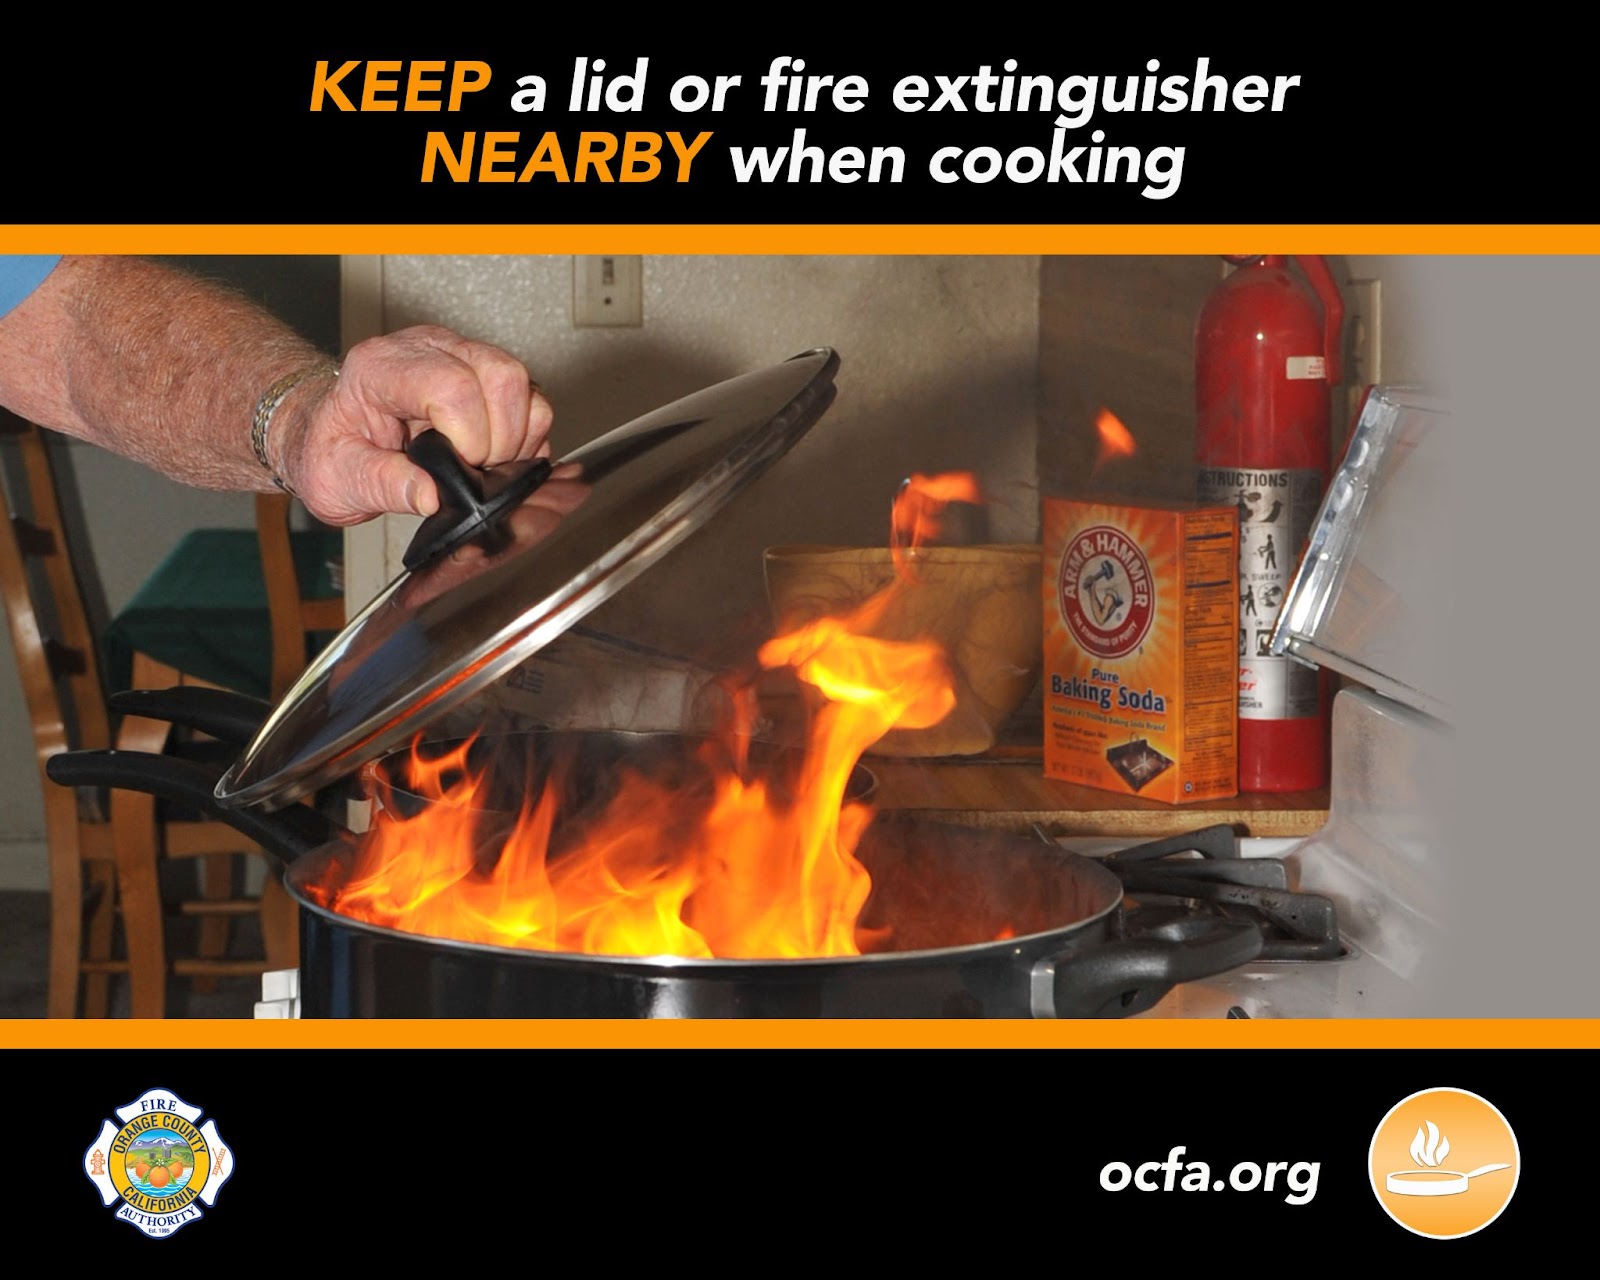 A picture of a burning pan and someone holding a lid and a fire extinguisher in the corner that said Keep a lid or fire extinguisher nearby when cooking